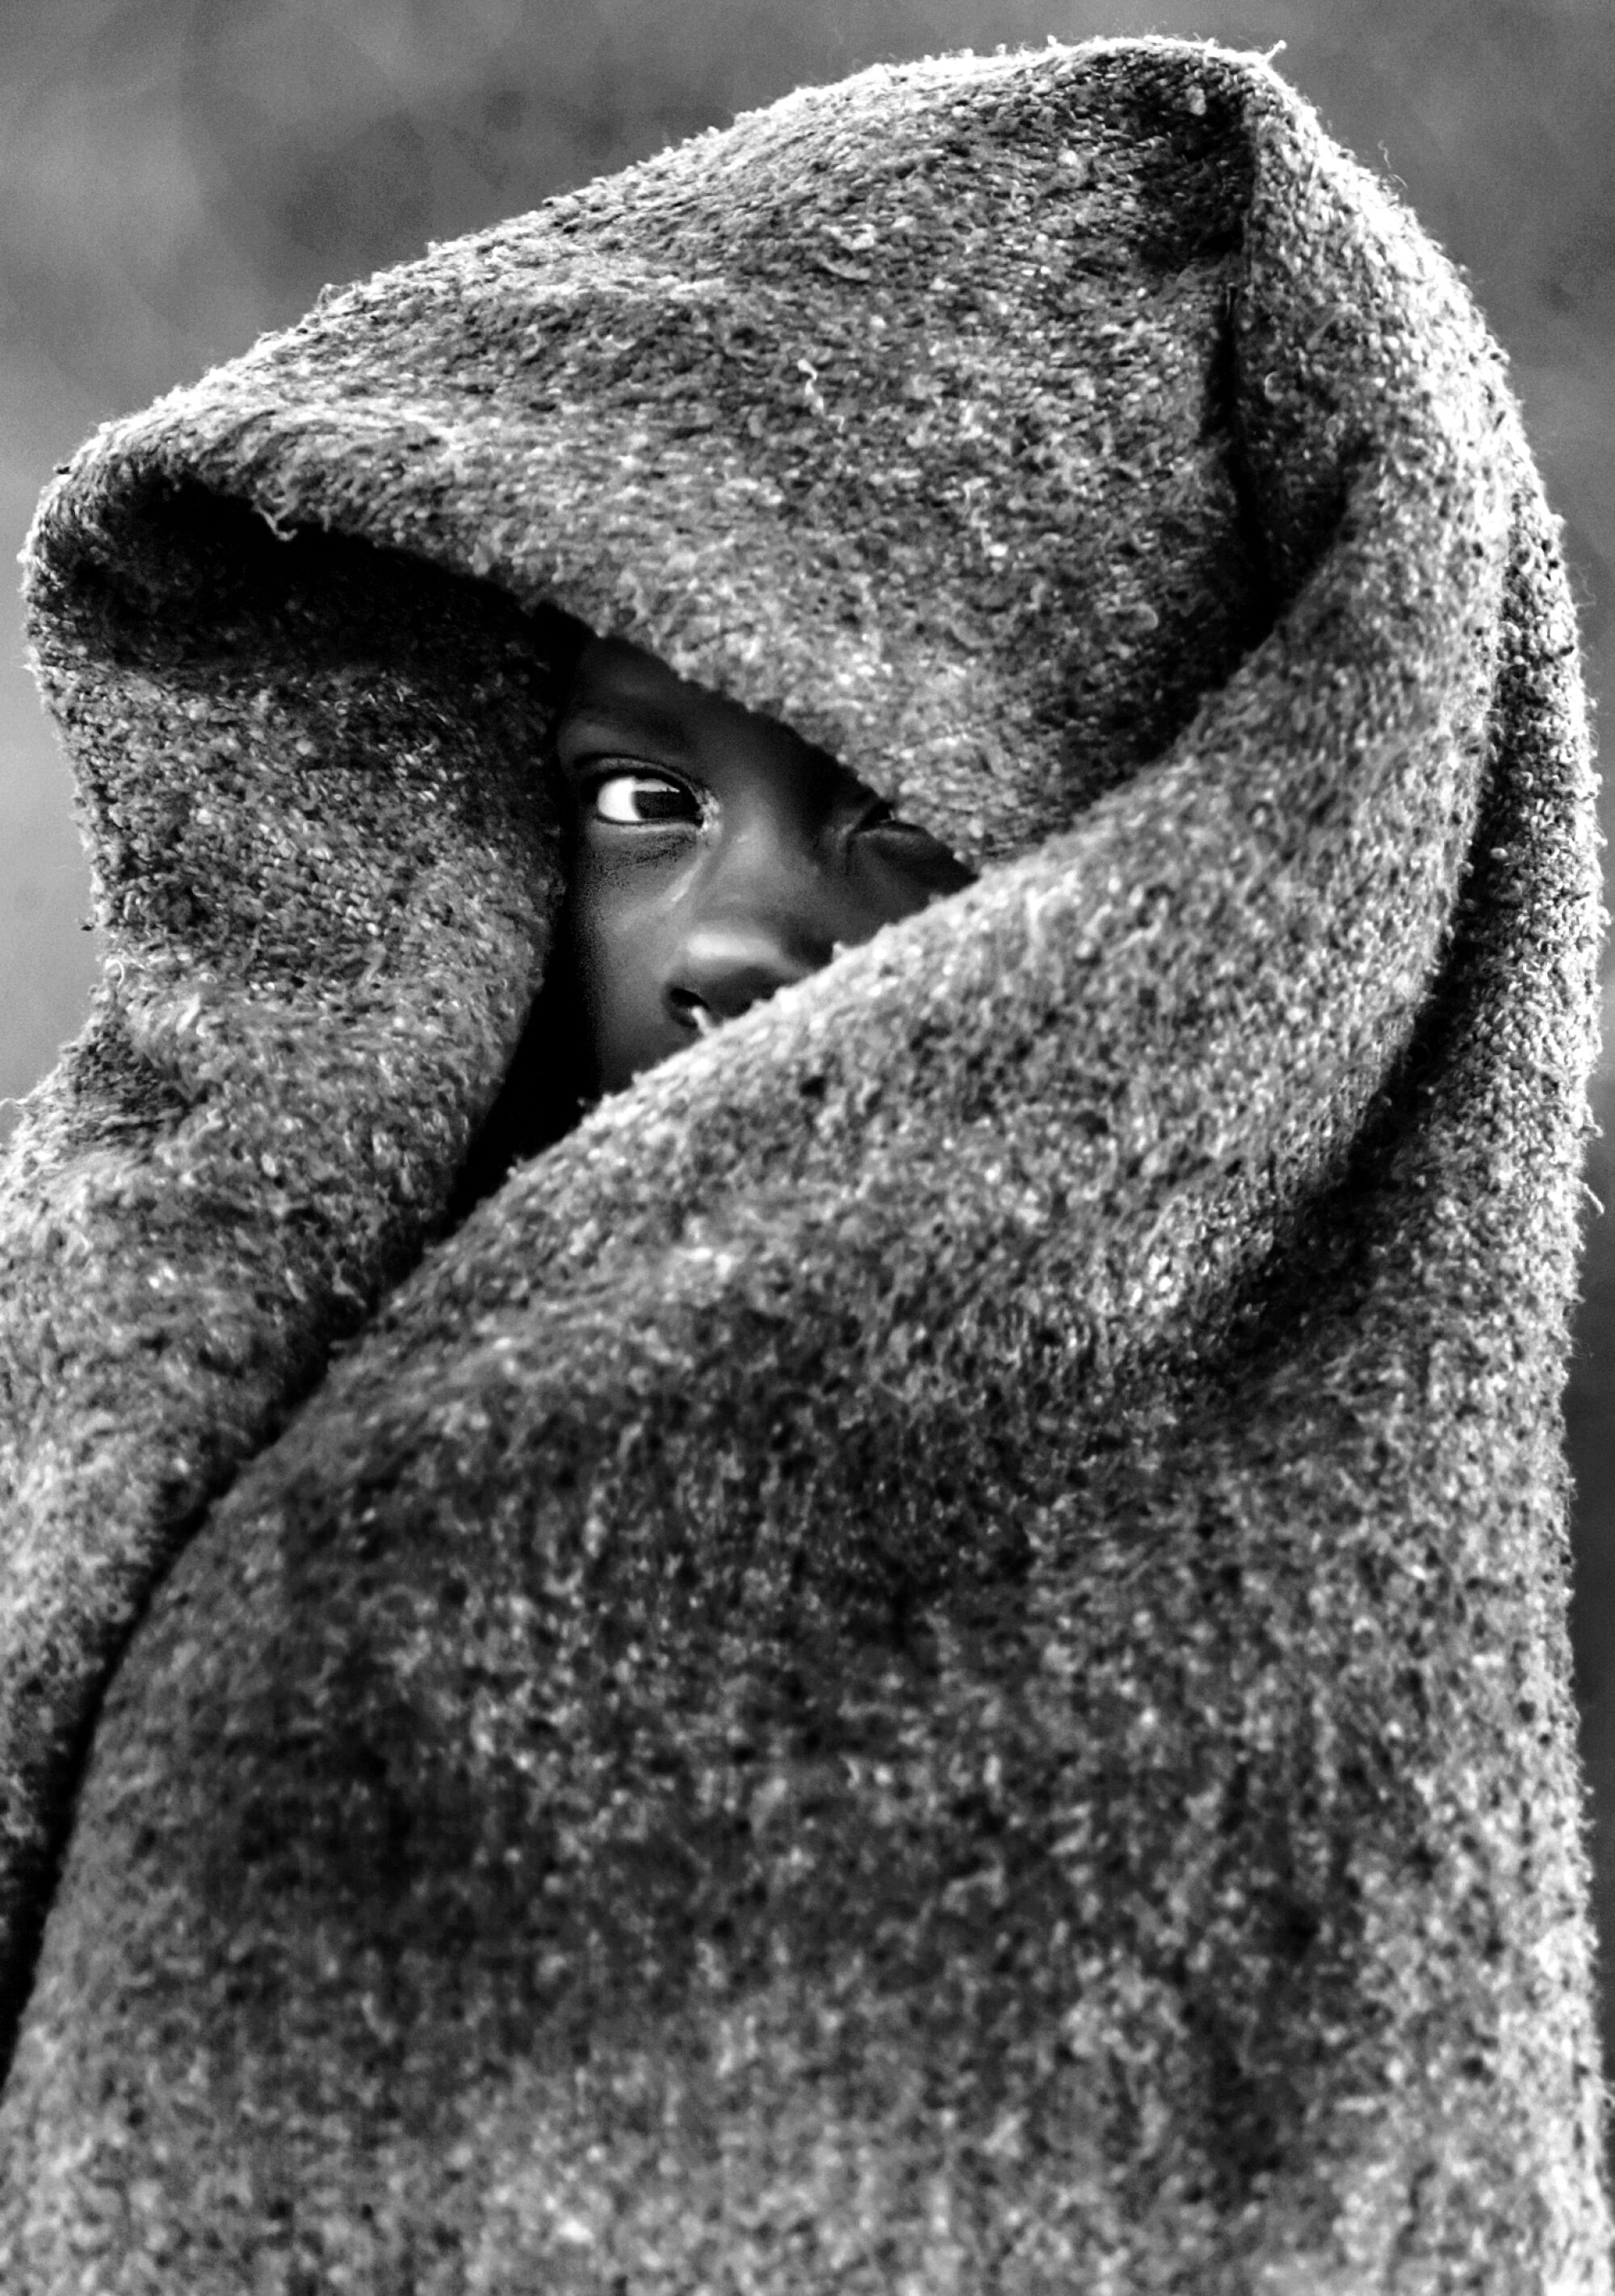 A child wrapped in a blanket; only part of their face is visible